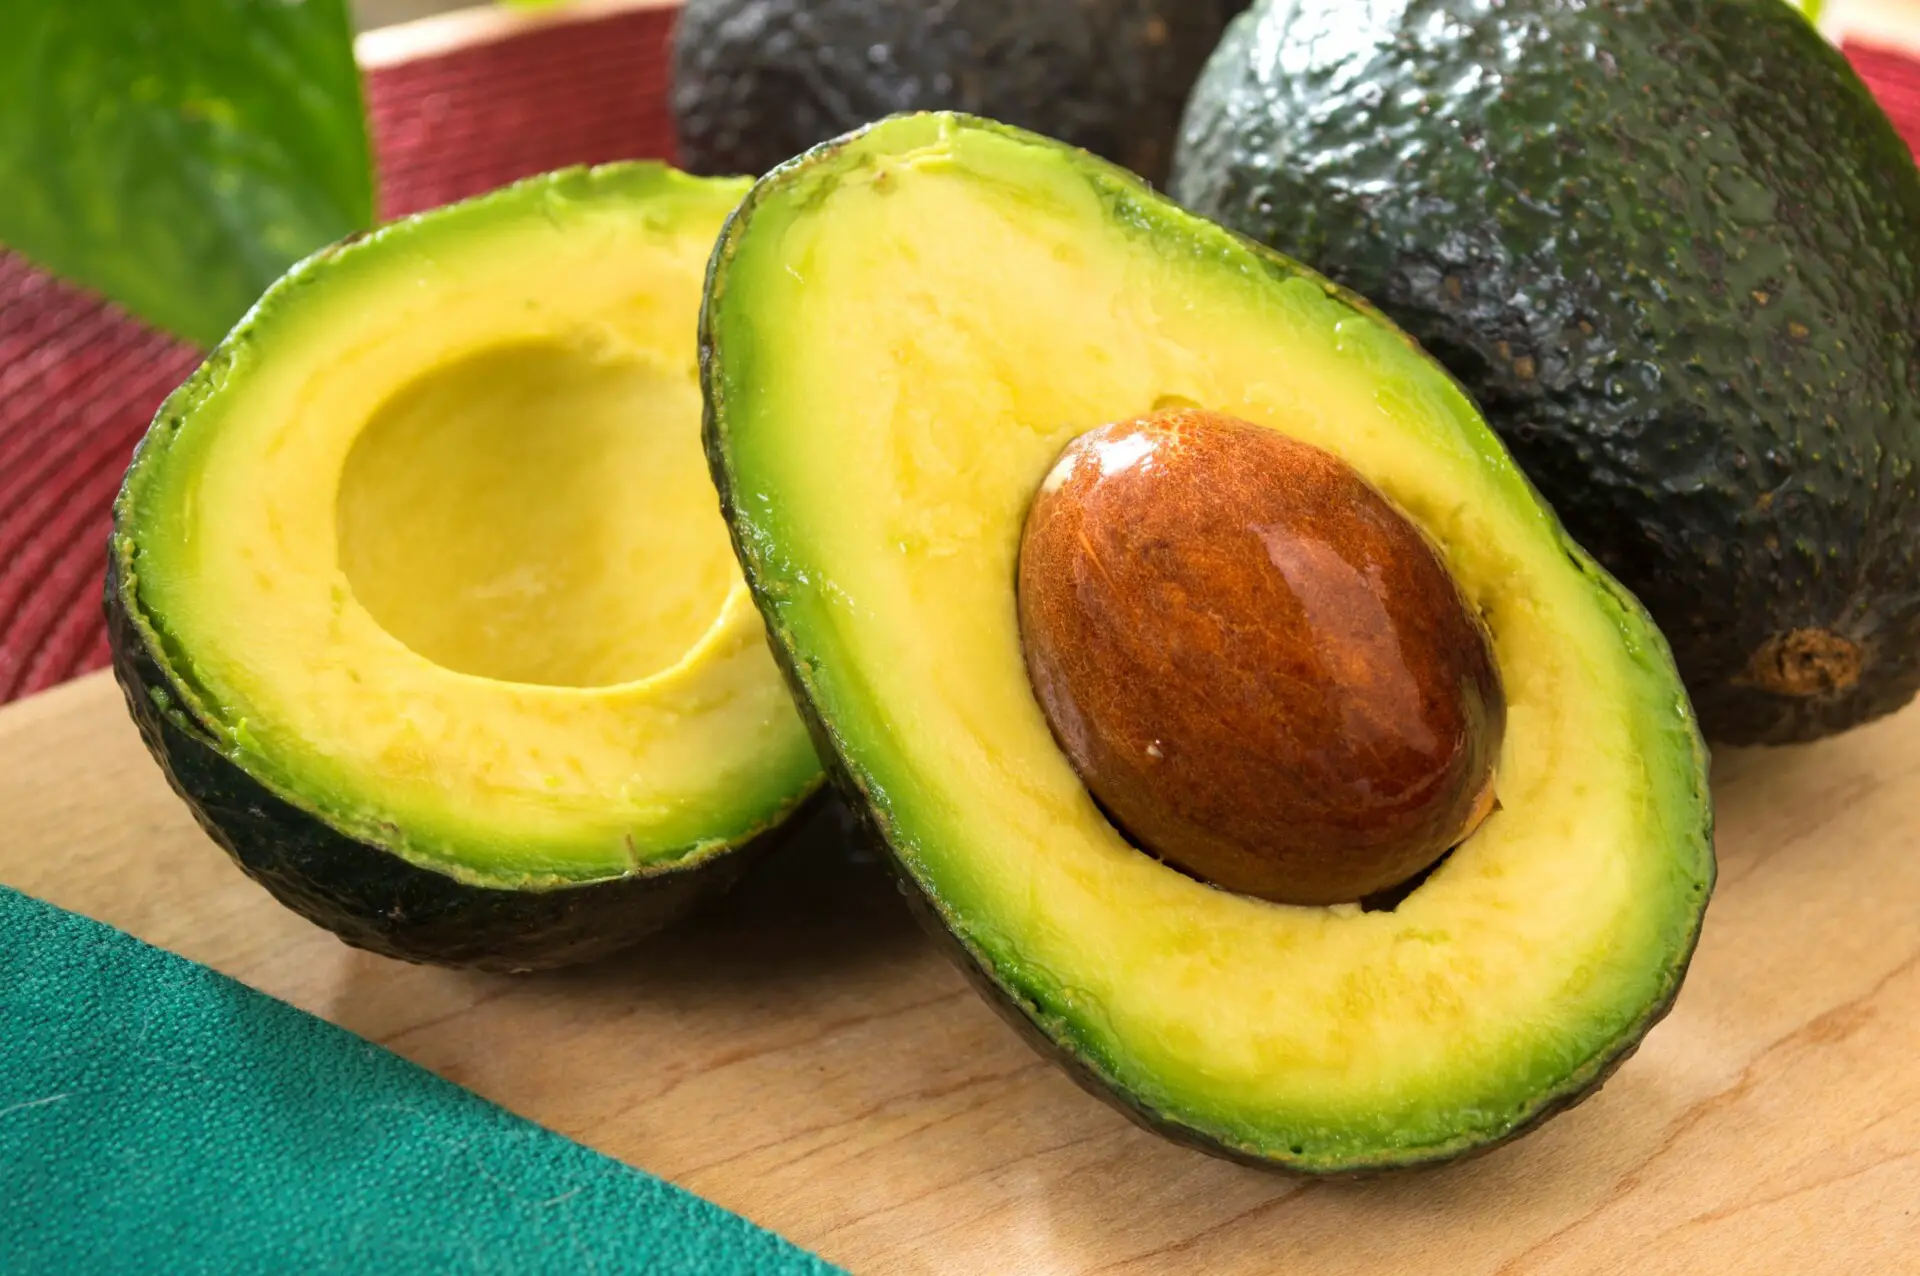 Are Avocados Bad for the Environment? 7 Crucial Facts